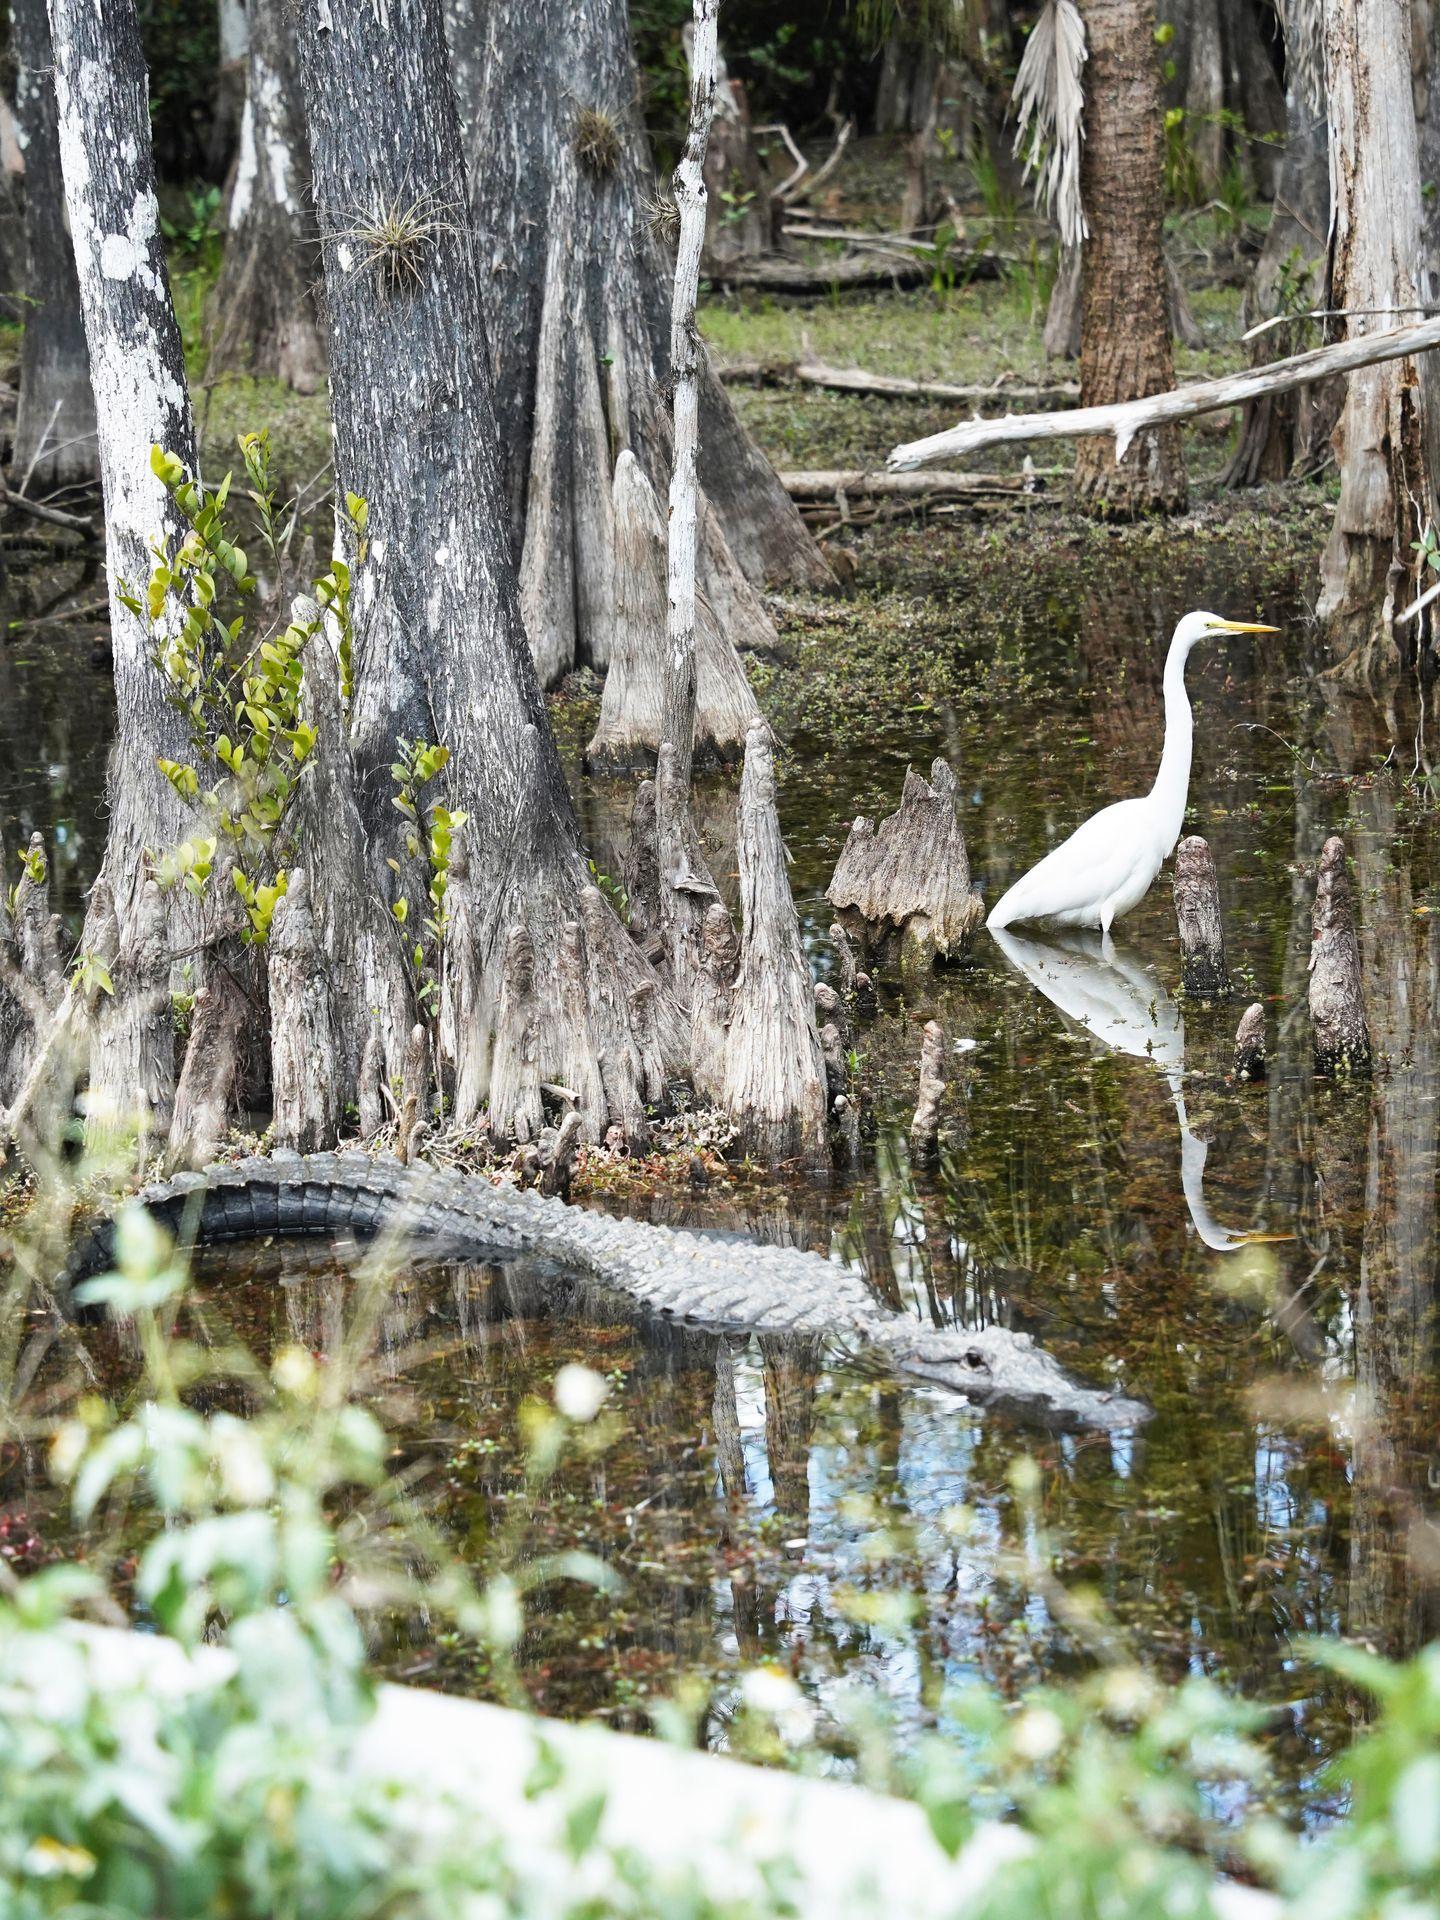 An alligator and a white bird seen along the loop drive in Big Cypress National Preserve.